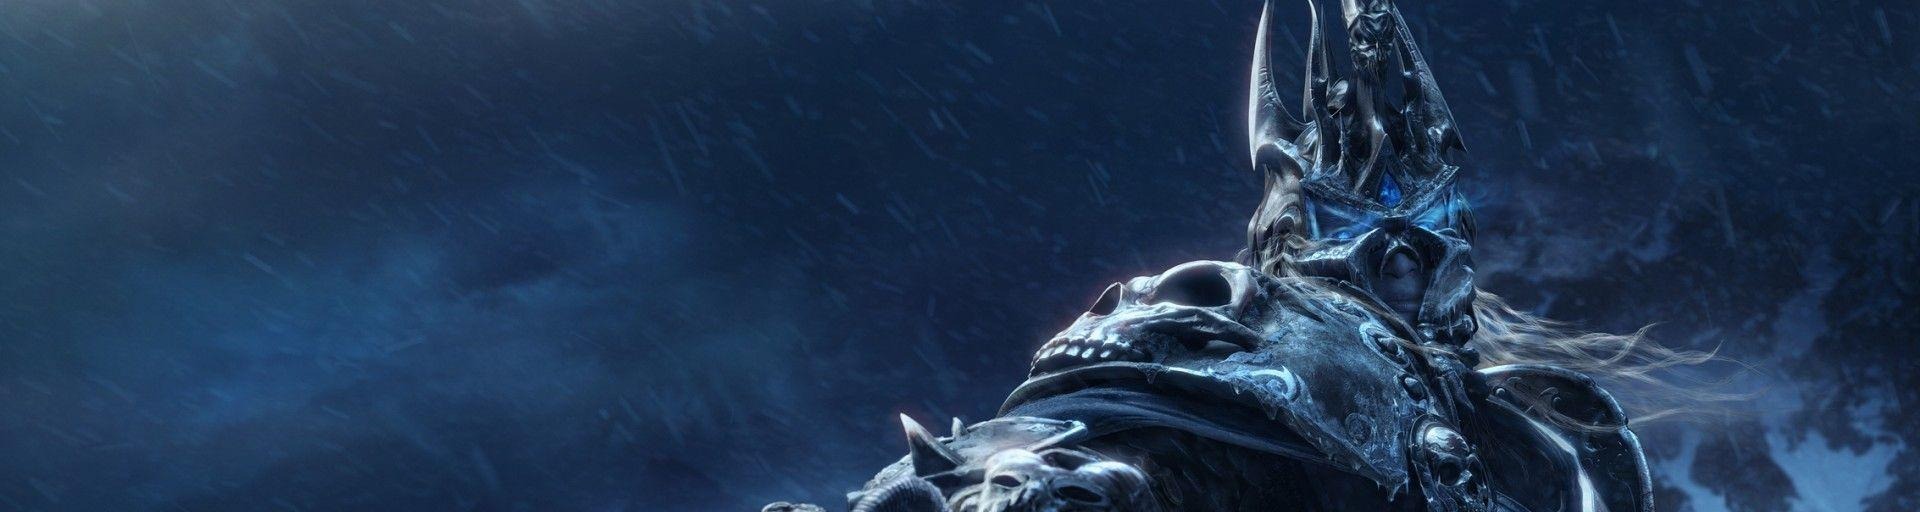 World of Warcraft: Wrath of the Lich King Classic - Northrend Heroic Upgrade bg